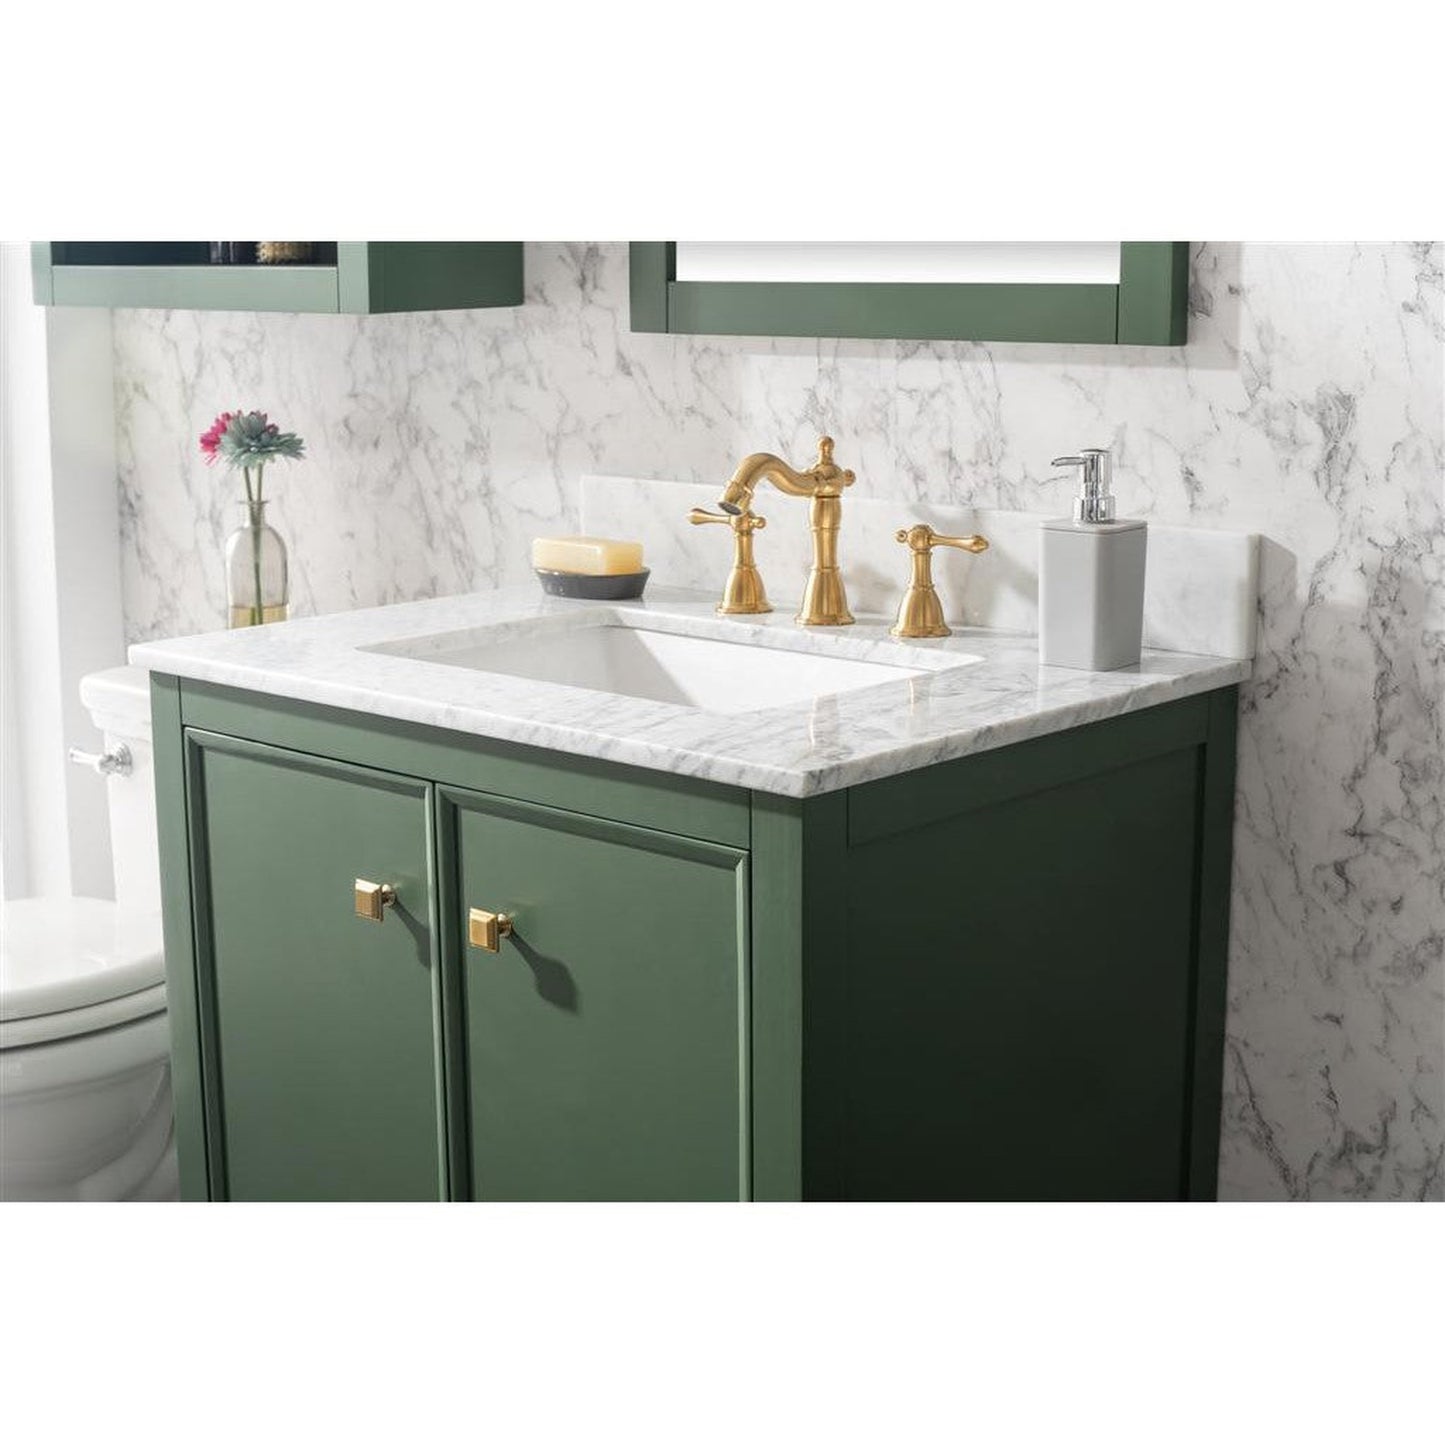 Legion Furniture WLF2130 30" Vogue Green Freestanding Vanity With White Carrara Marble Top and White Ceramic Sink